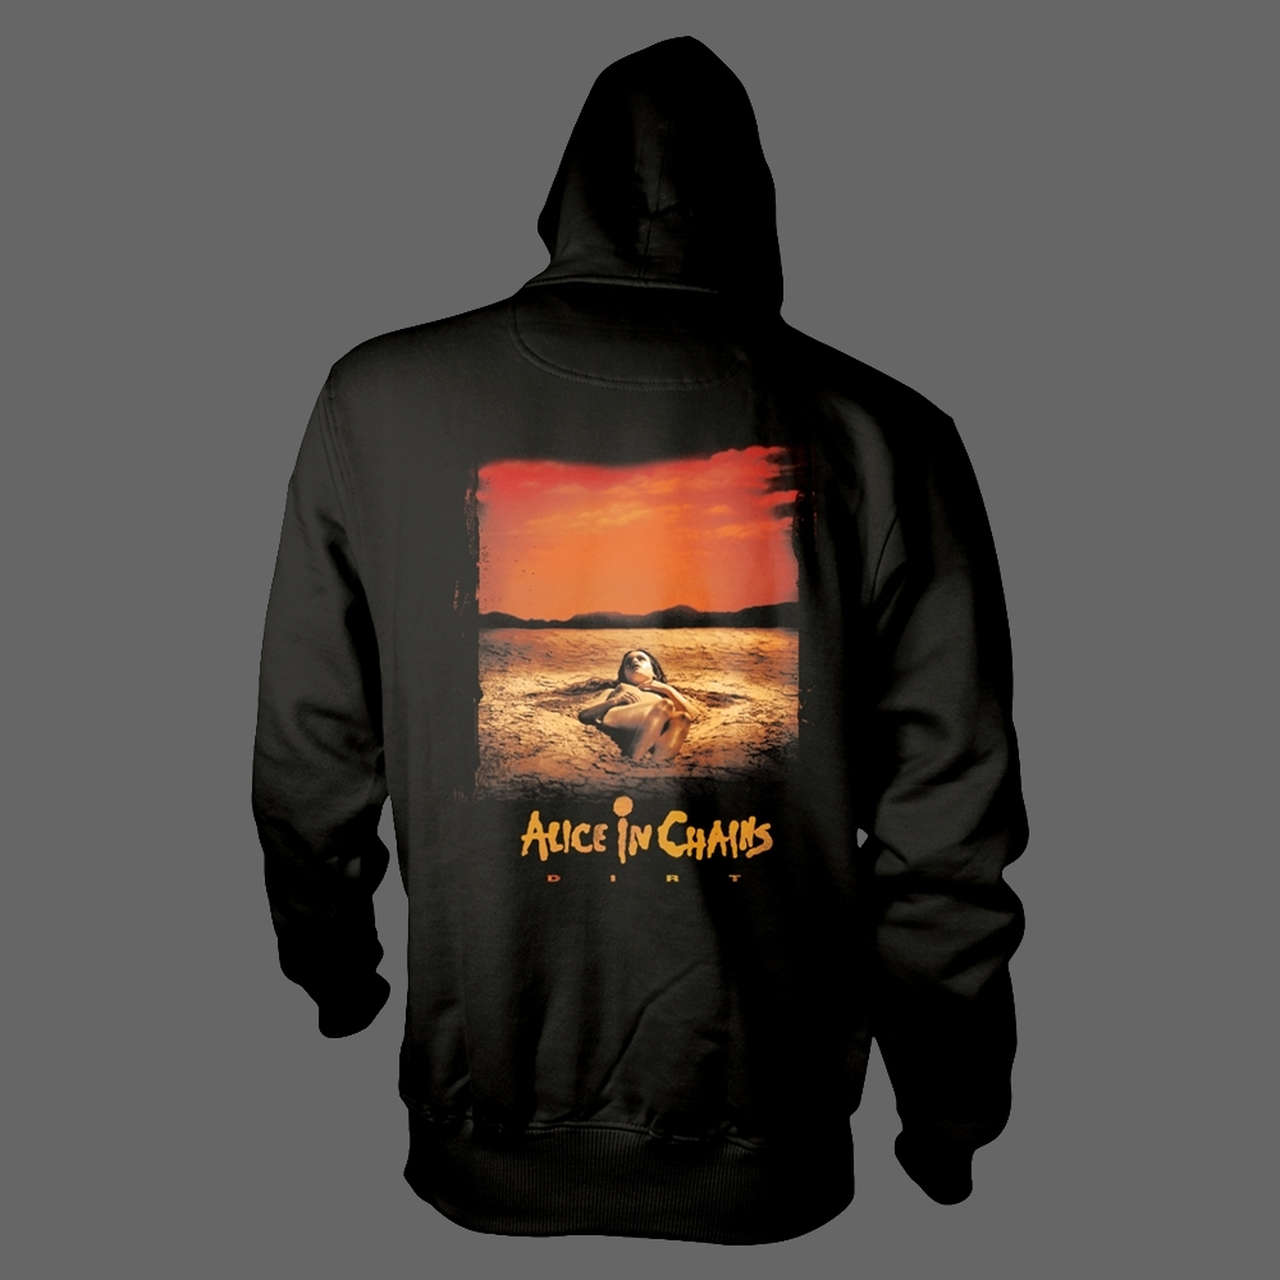 Alice in Chains - Dirt (Hoodie)